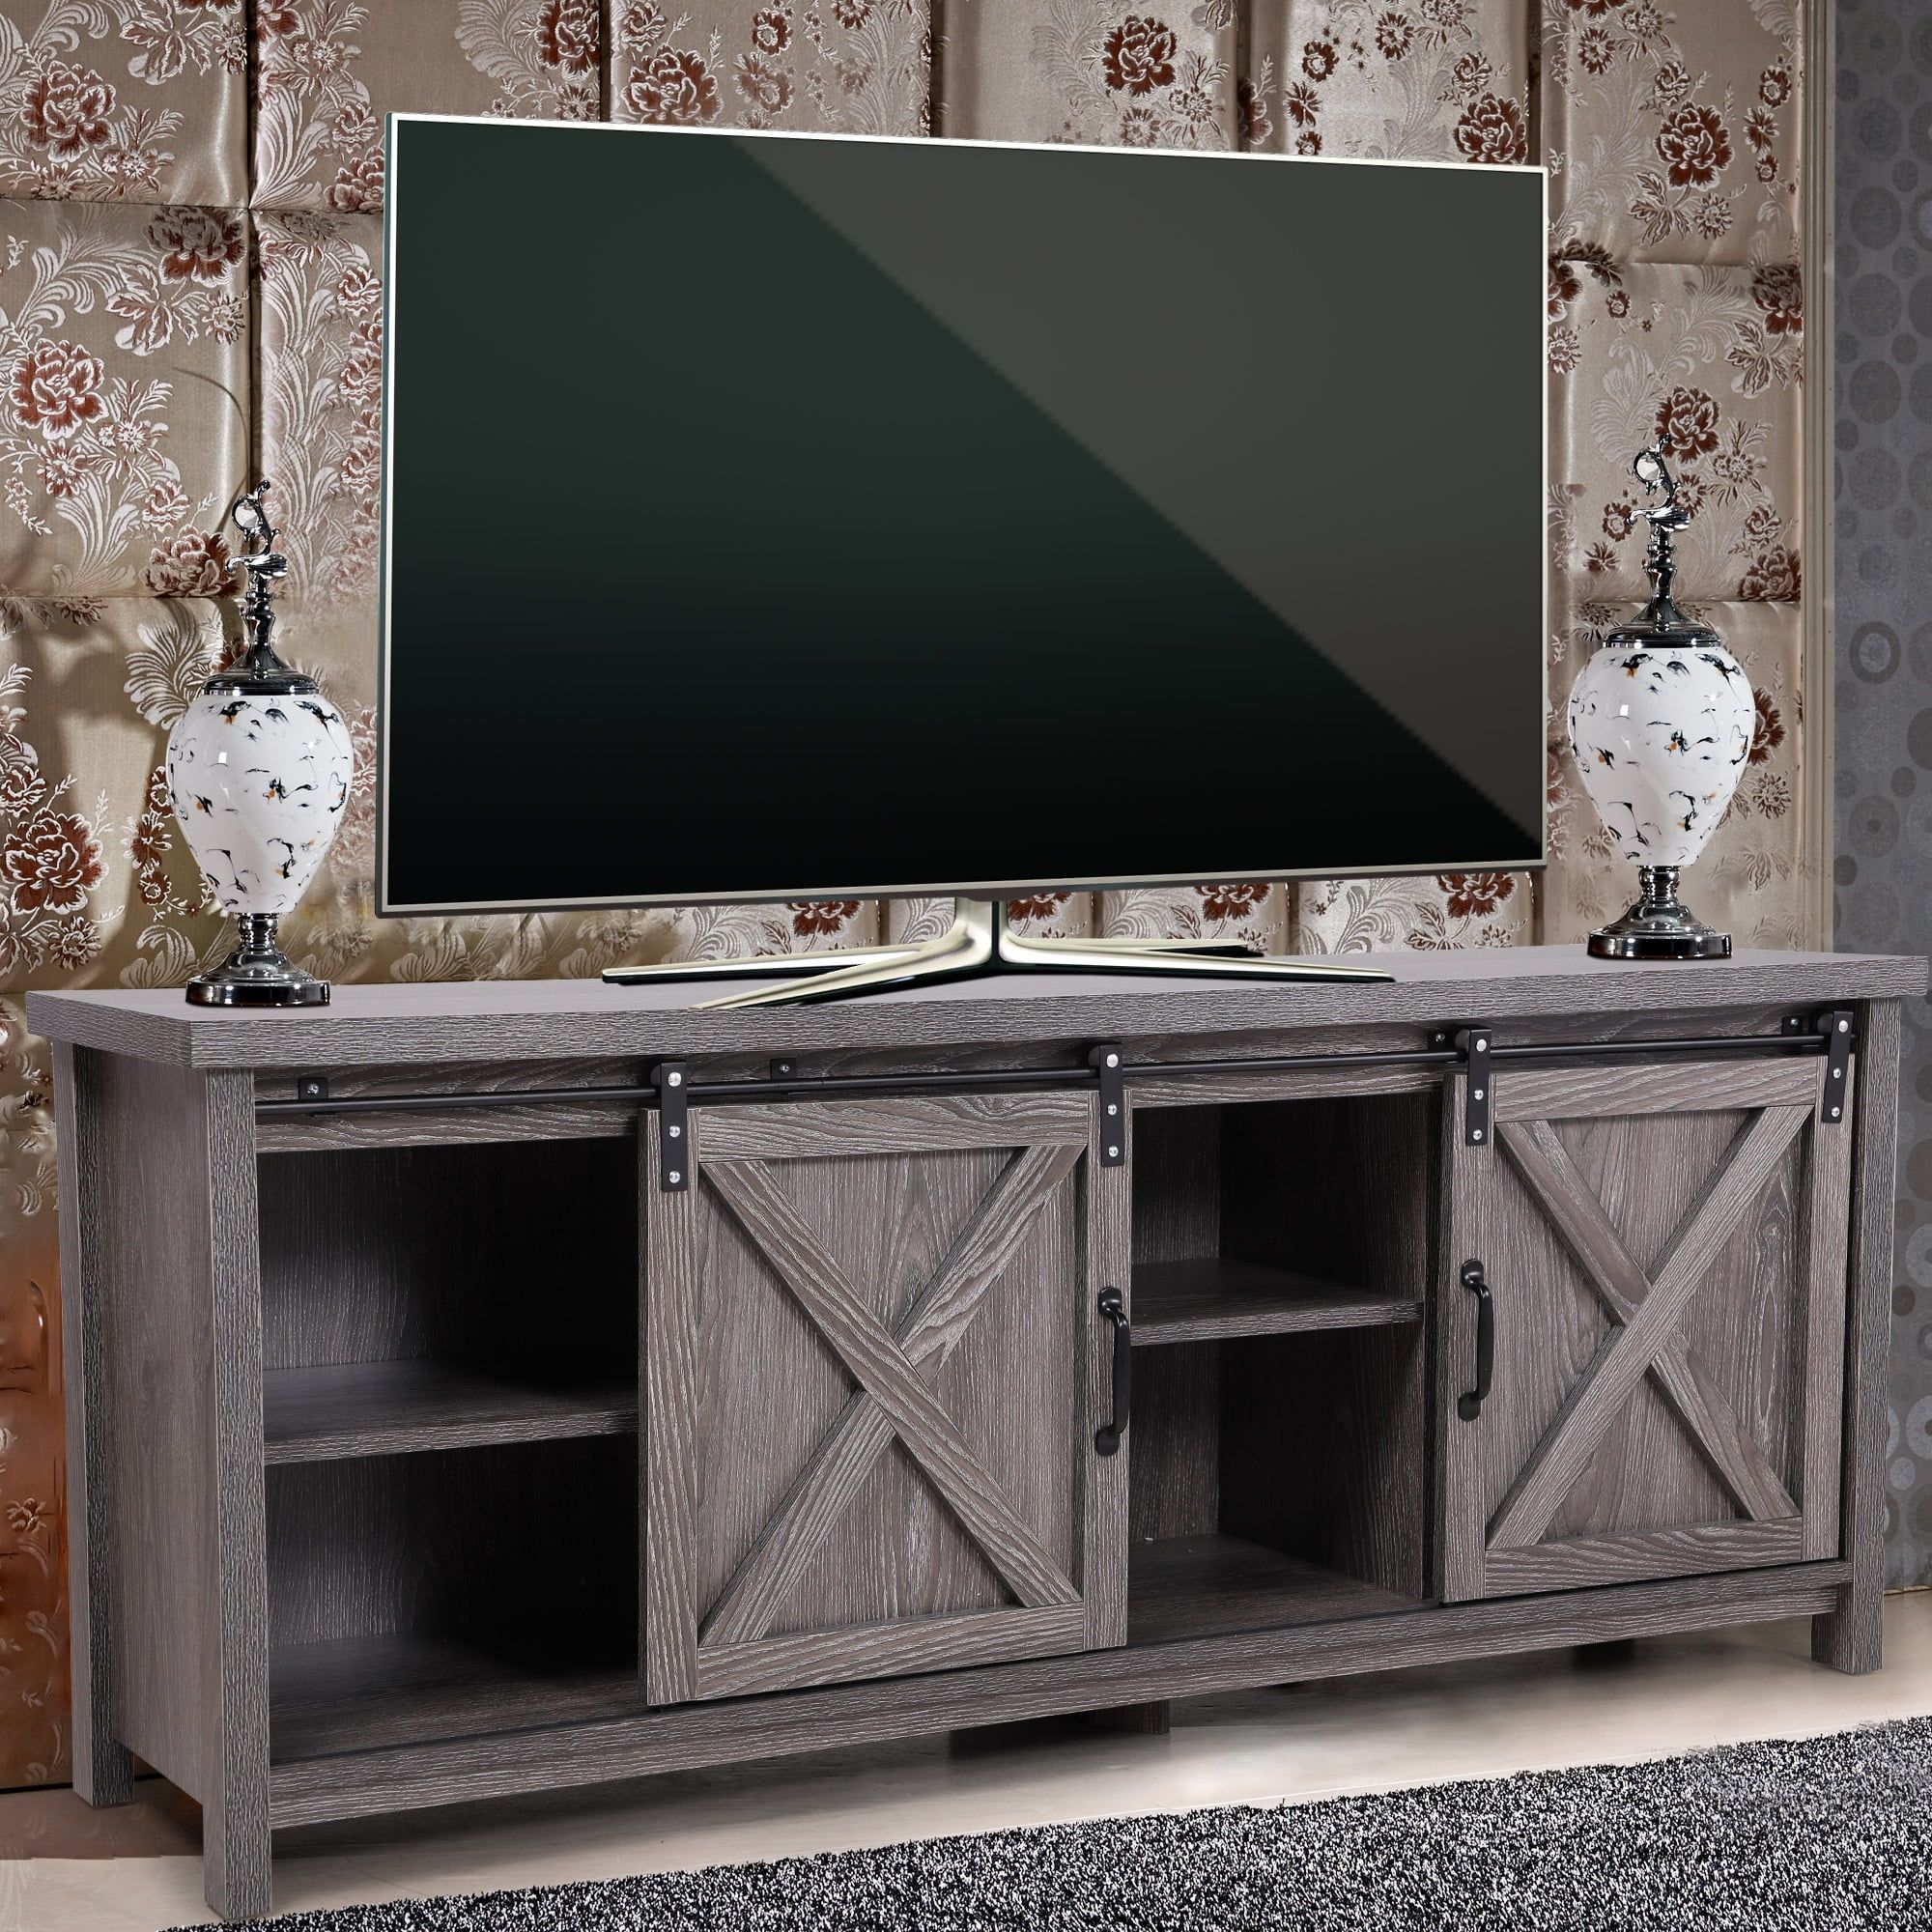 Jaxpety 58" Farmhouse Sliding Barn Door Tv Stand For Tvs Up To 65 Inside Farmhouse Media Entertainment Centers (Gallery 1 of 20)